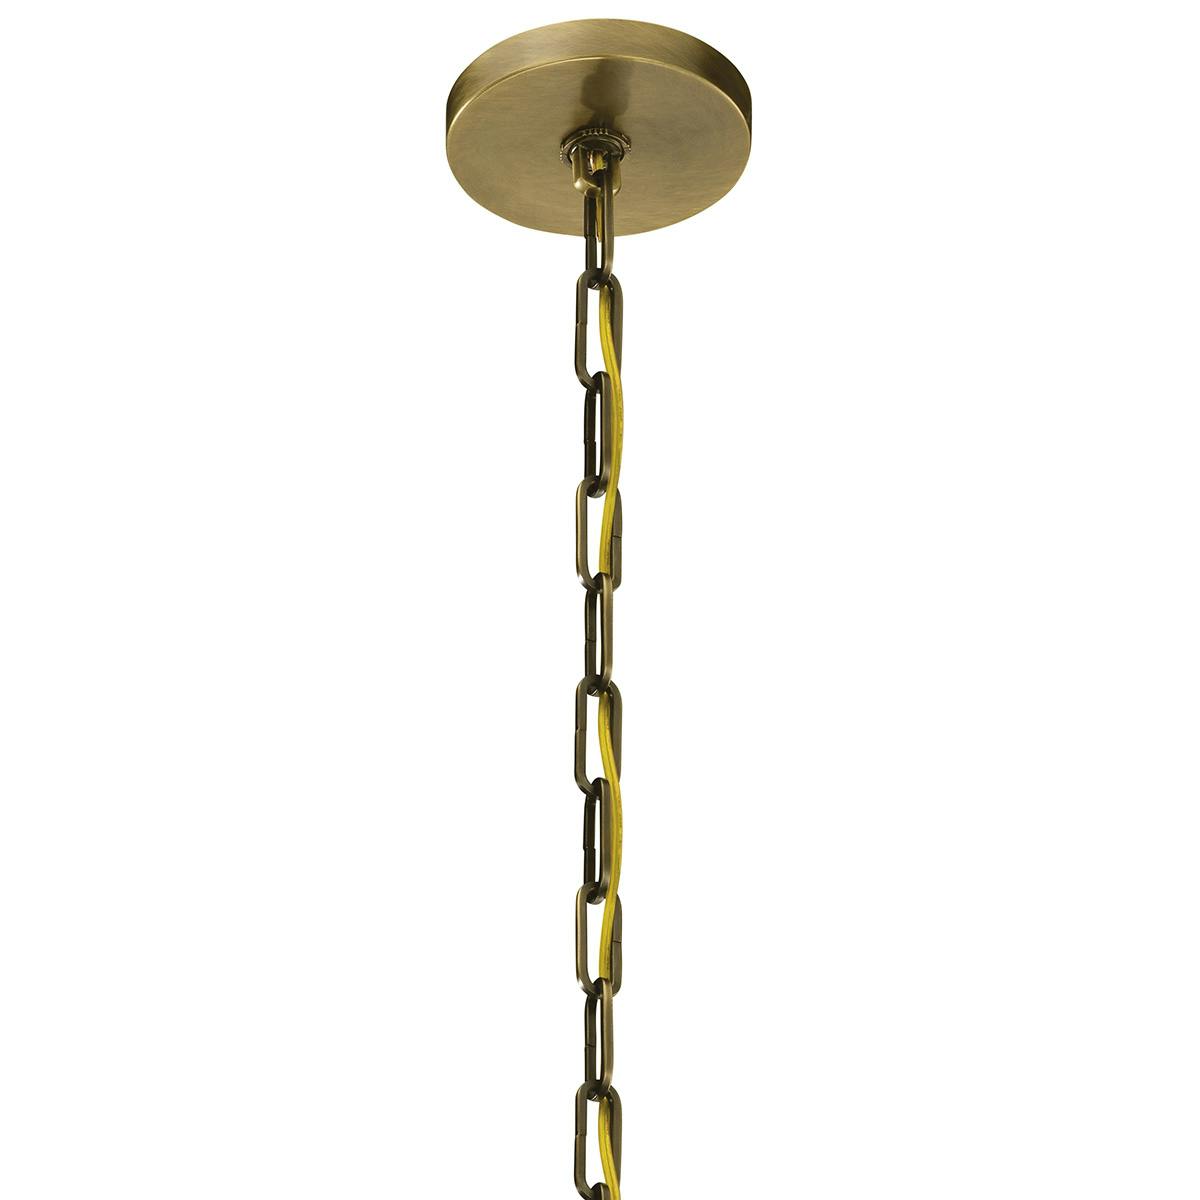 Canopy for the Abbotswell 23.5" Mini Pendant Brass on a white background